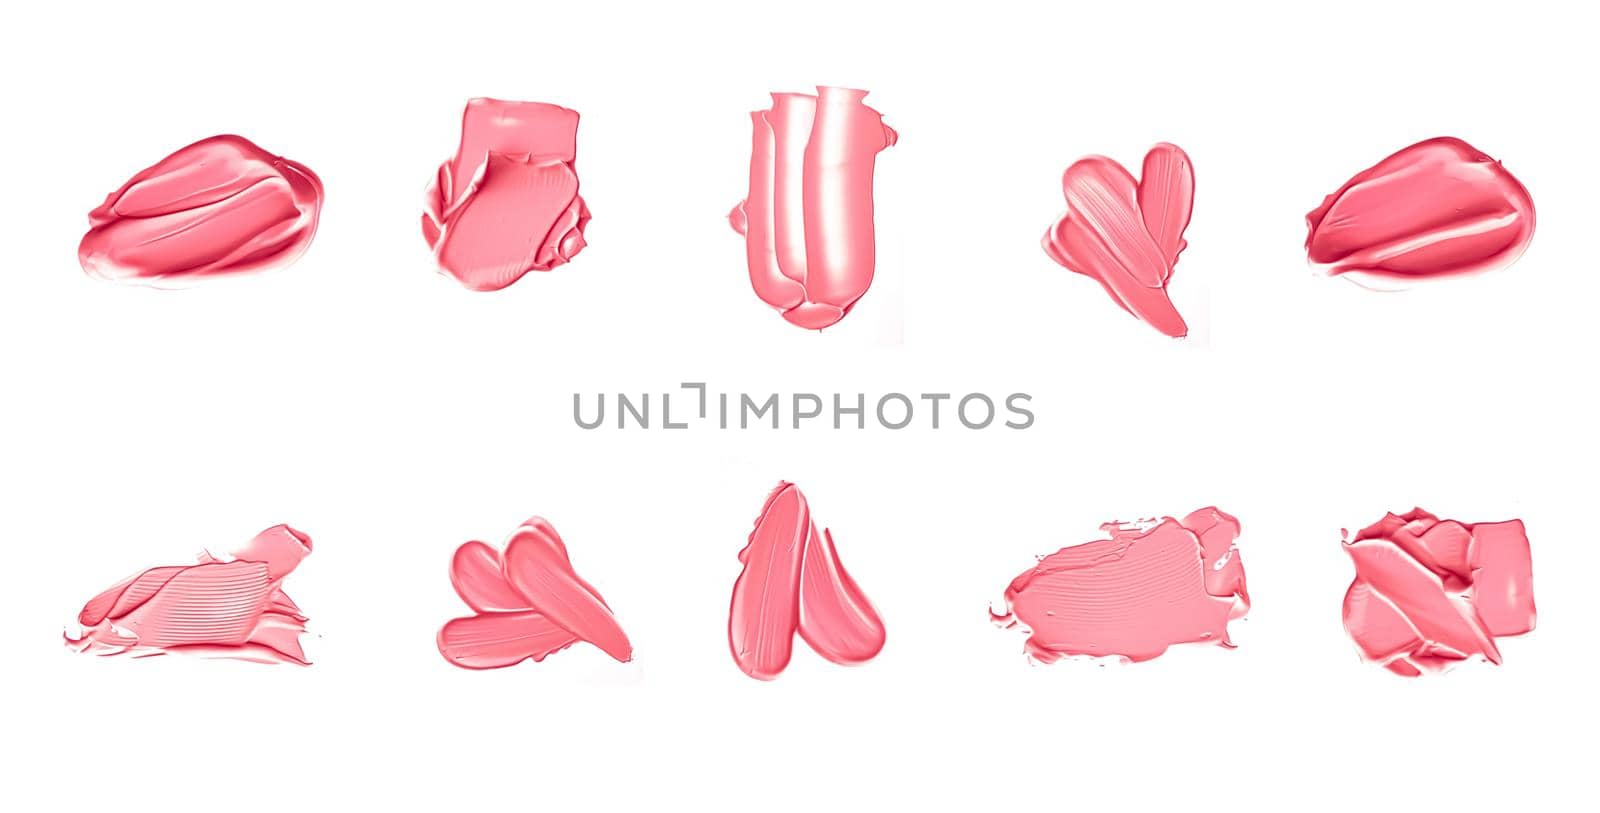 Pastel red beauty swatches, skincare and makeup cosmetic product sample texture isolated on white background, make-up smudge, cream cosmetics smear or paint brush stroke closeup